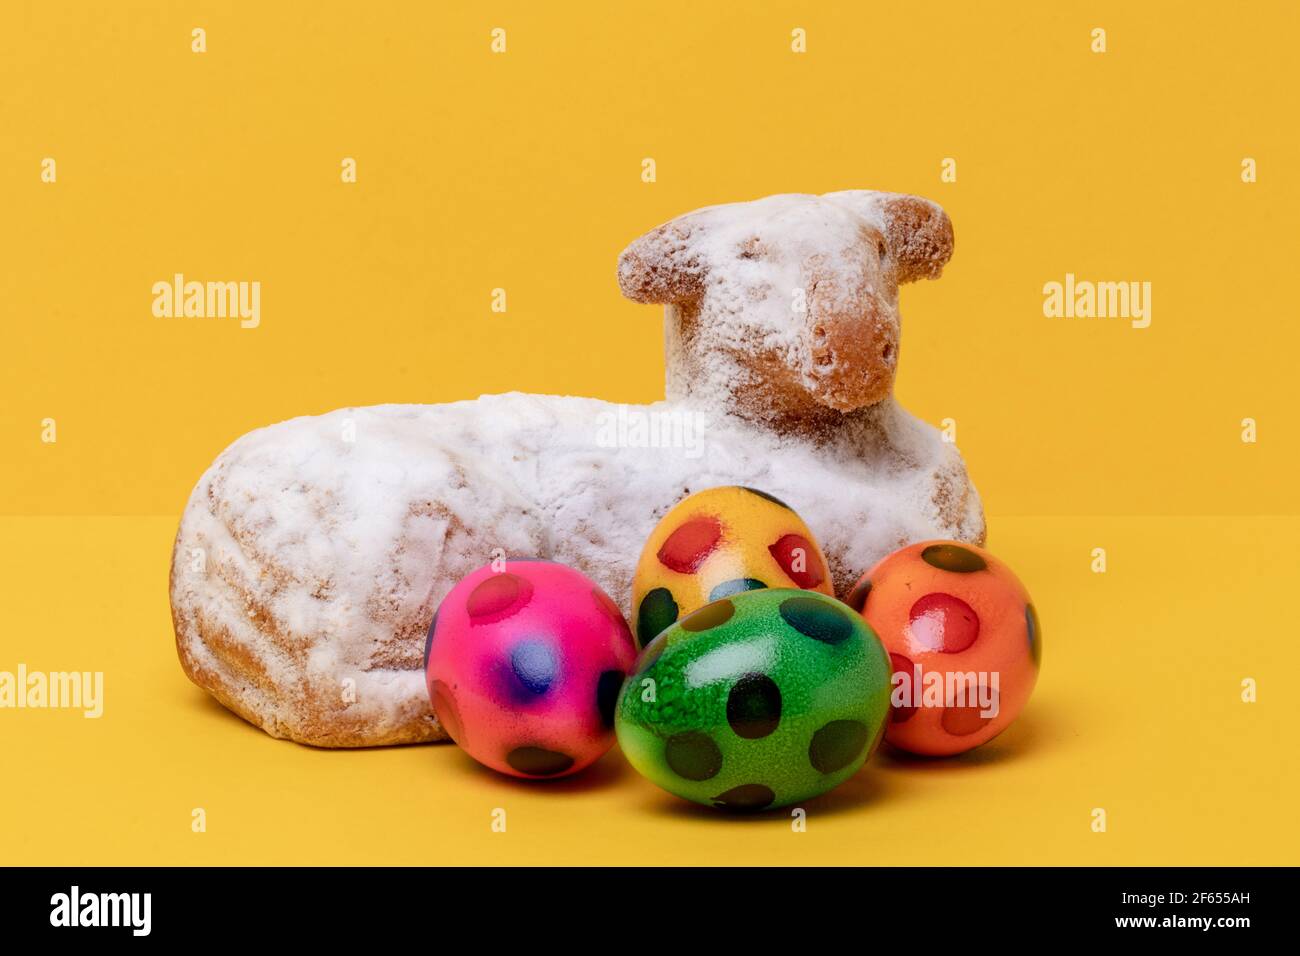 Easter card template. Close-up of a traditional easter lamb cake and some colorful eggs on yellow table and background. Copy space for design. Macro. Stock Photo